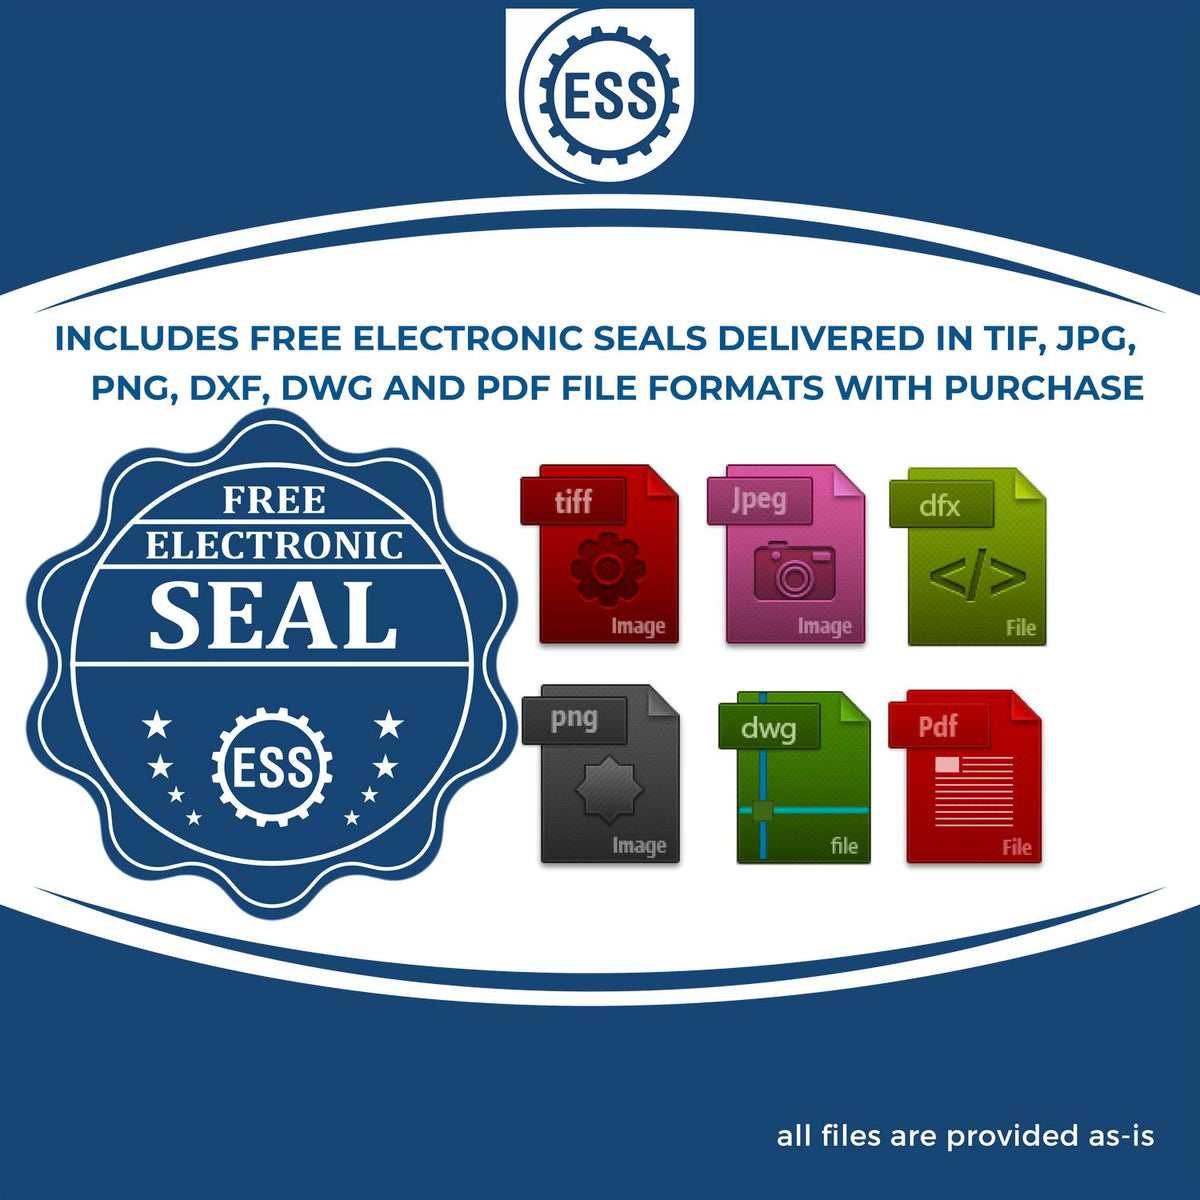 An infographic for the free electronic seal for the Heavy Duty Cast Iron Missouri Engineer Seal Embosser illustrating the different file type icons such as DXF, DWG, TIF, JPG and PNG.